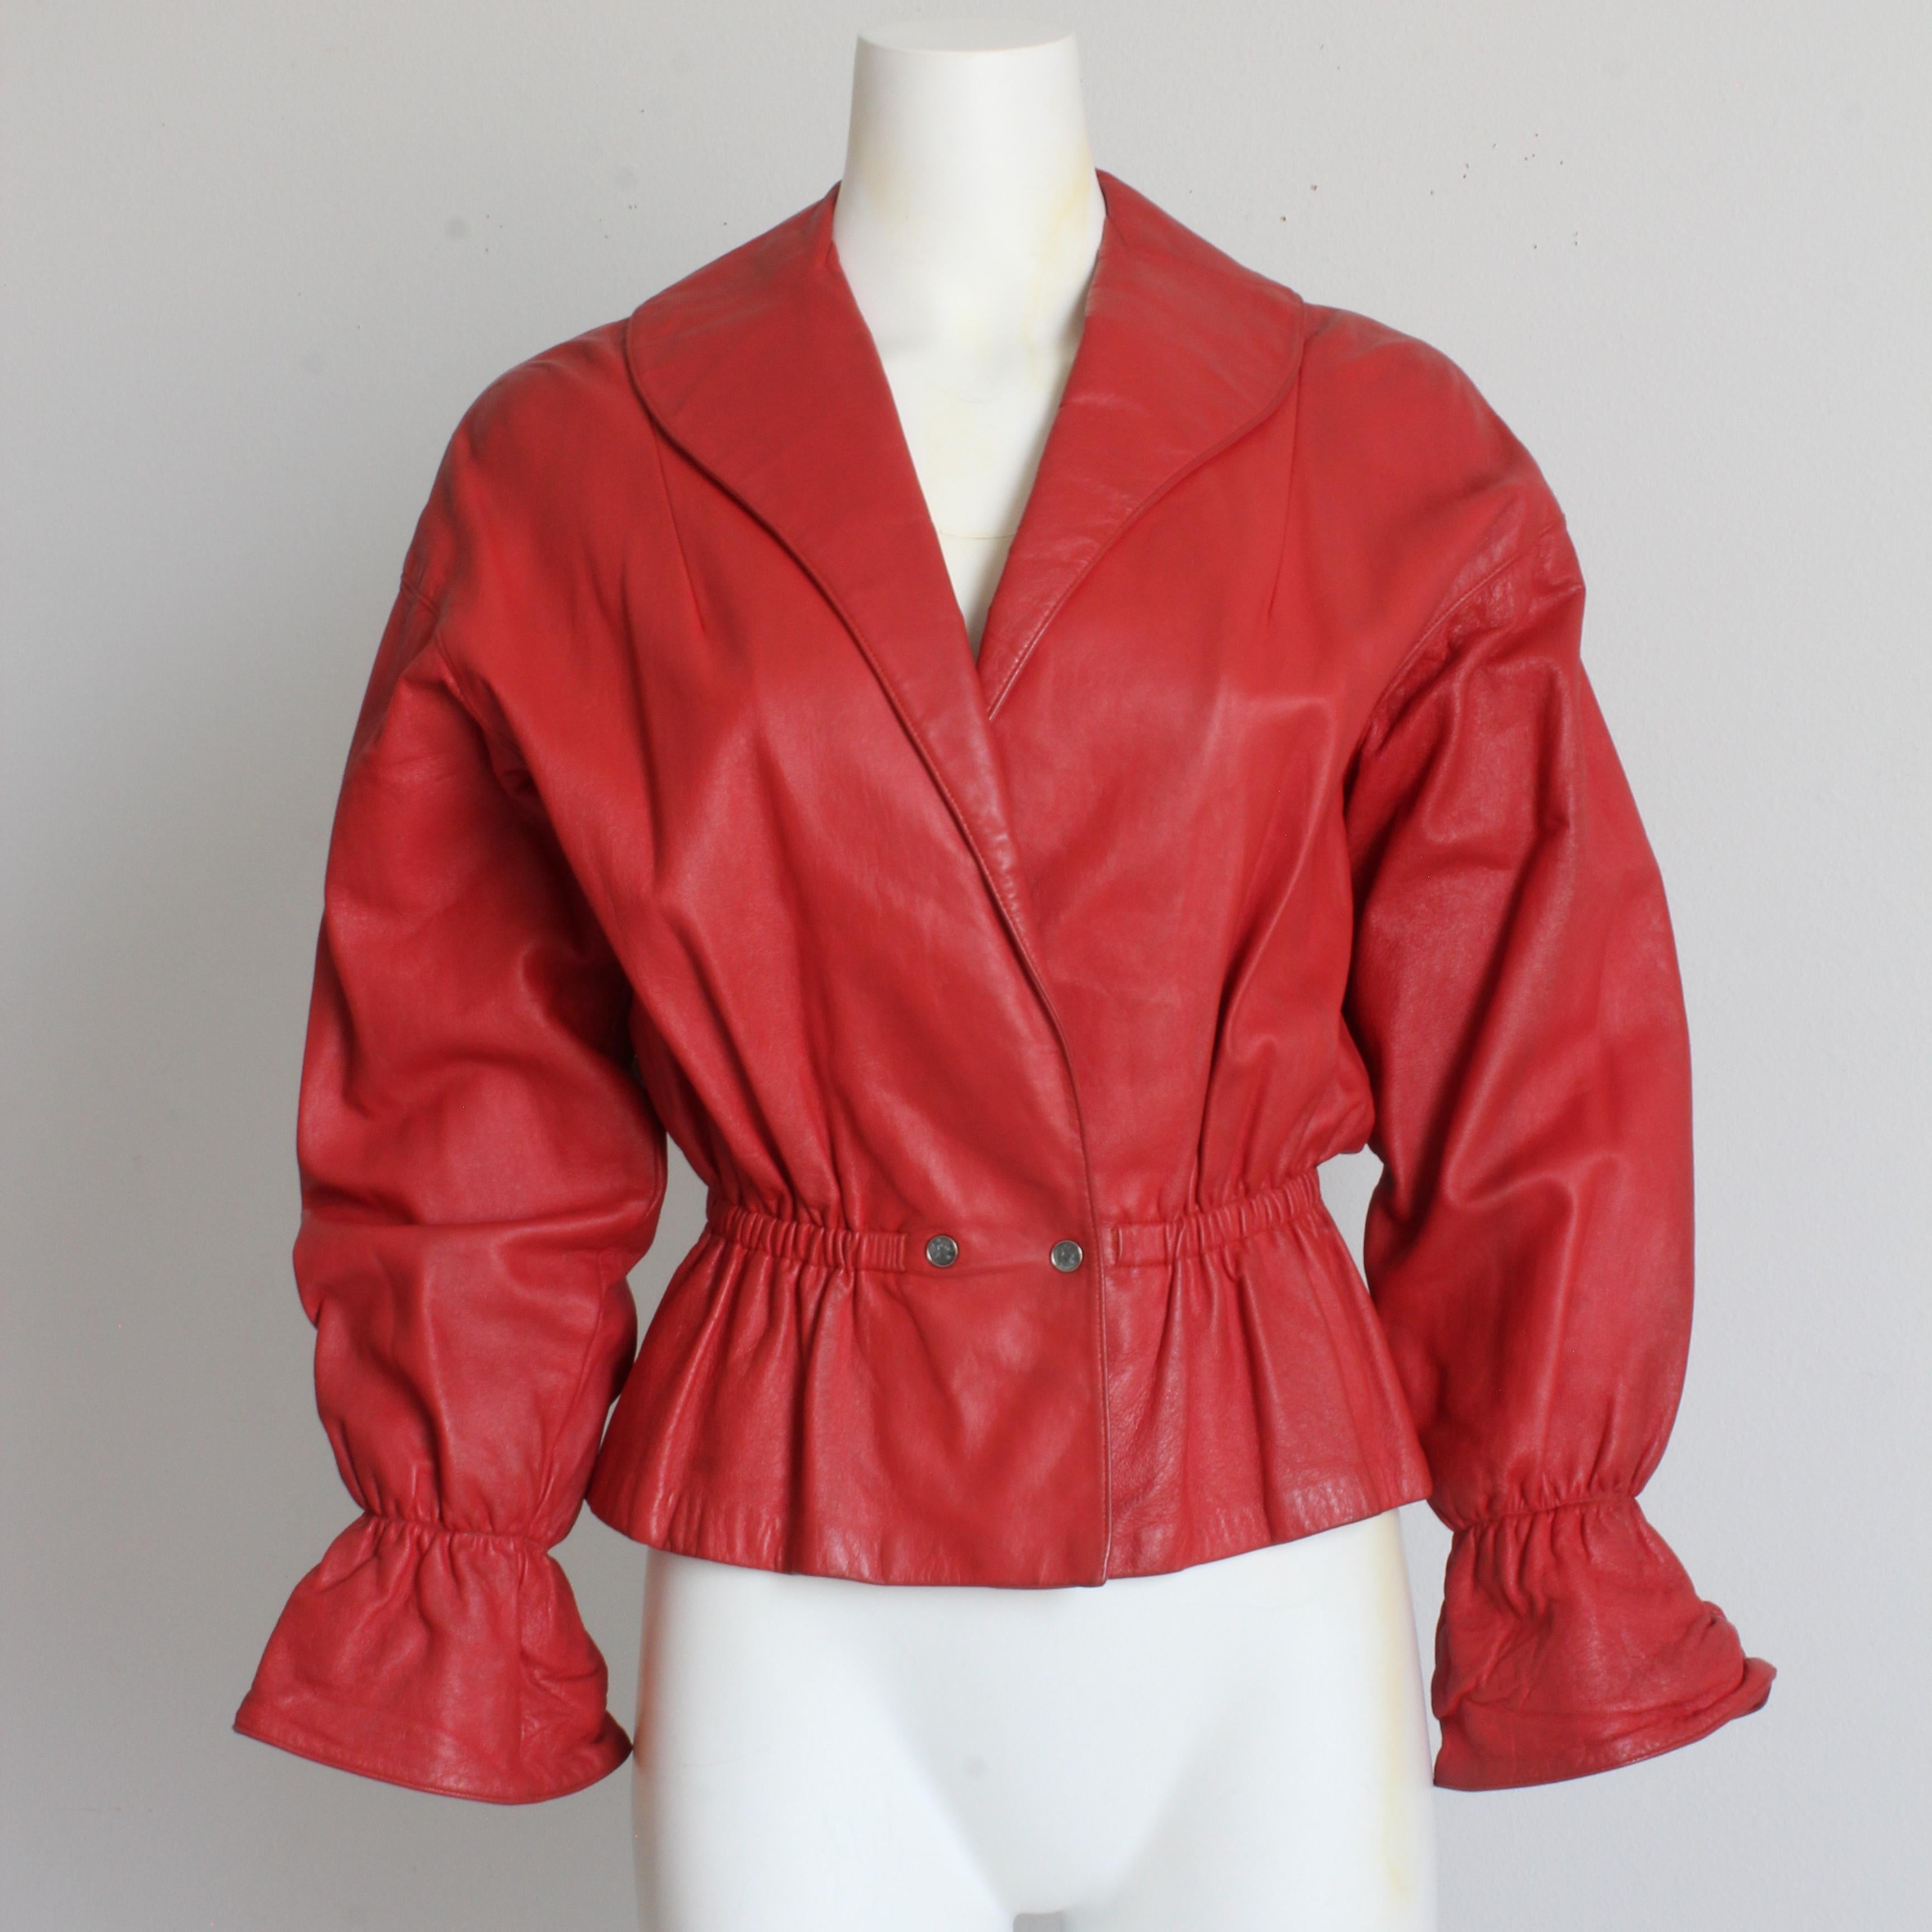 Authentic, preowned, vintage Bonnie Cashin for Sills red leather jacket, circa the early 60s. 

An incredibly rare style from the mother of modern American sportswear!  Made from red leather, it features Dolman sleeves, a shawl collar, elasticized